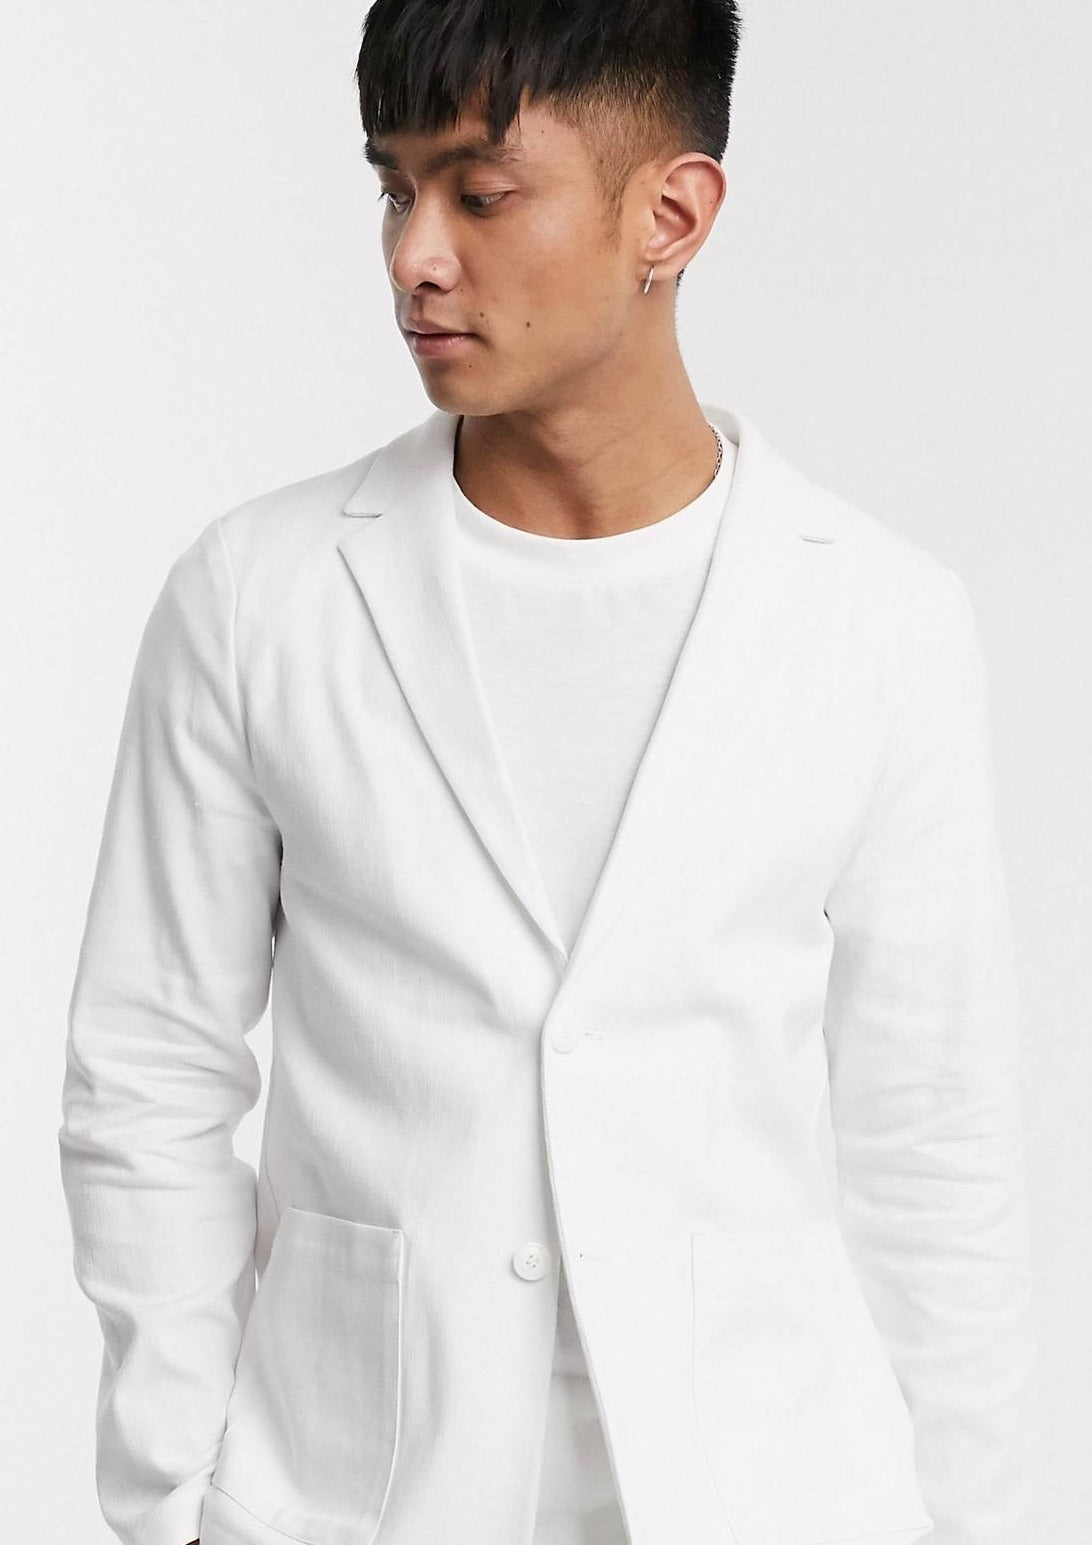 White Shawl Dinner Jacket | Rent or Buy from $84